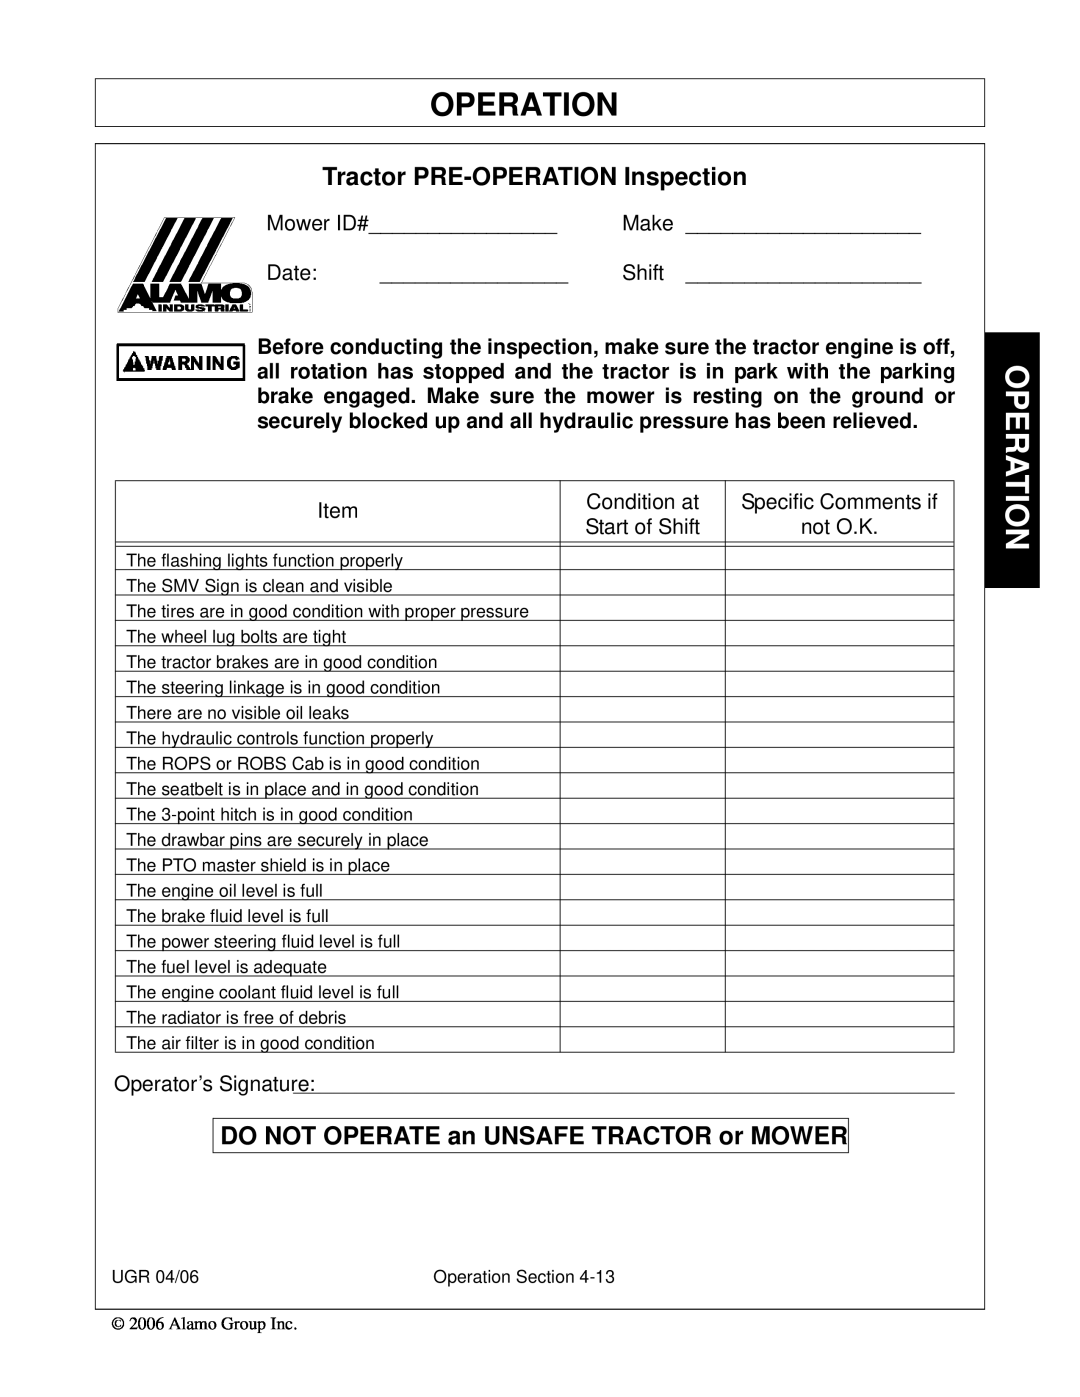 Alamo 02979718C manual Tractor PRE-OPERATIONInspection, DO NOT OPERATE an UNSAFE TRACTOR or MOWER, Operation 